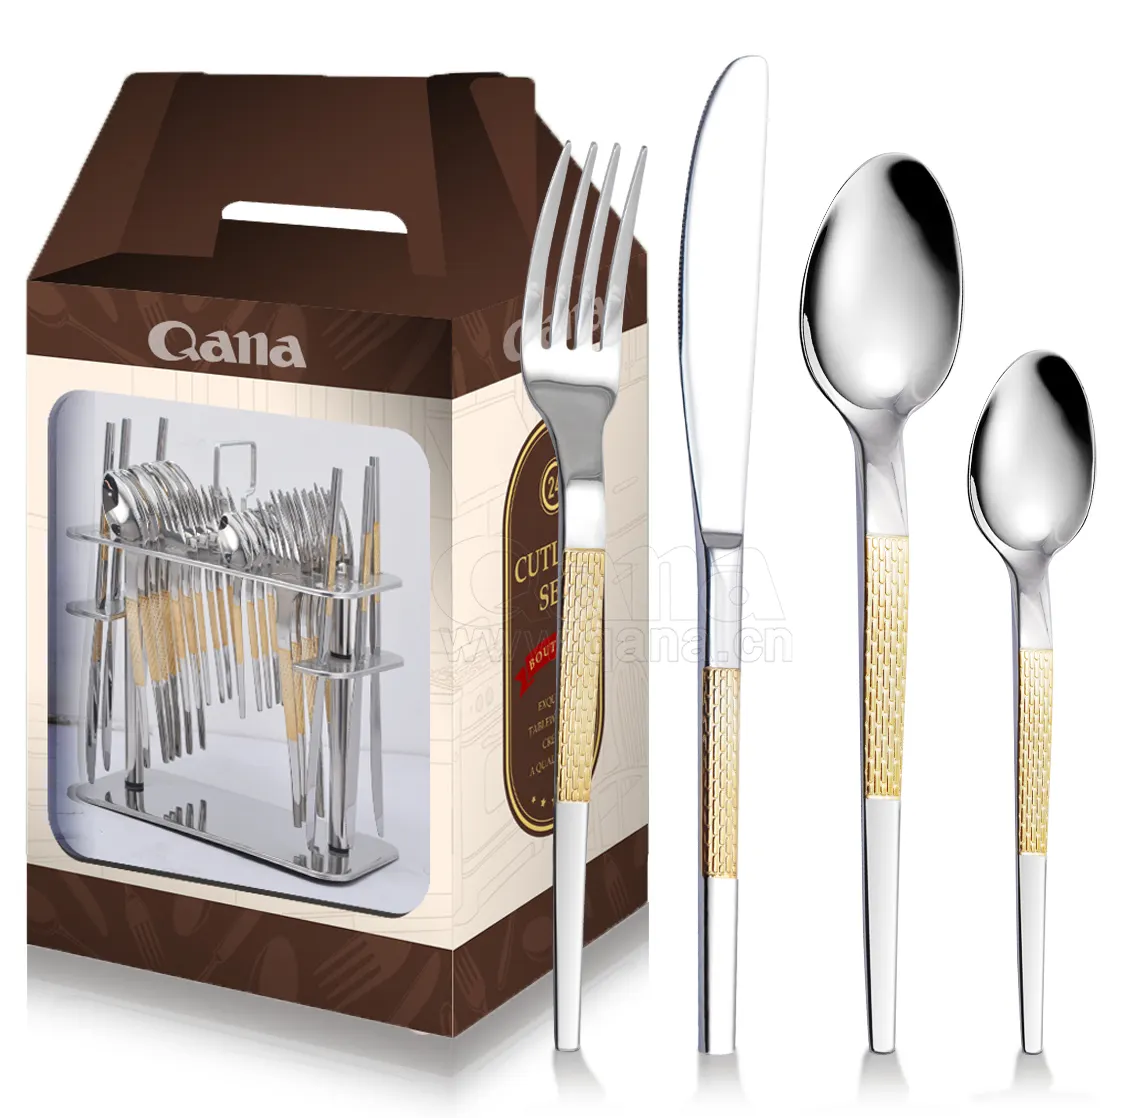 QANA Factory Wholesale OEM China Manufacturer Dinner Party Luxury Cutlery Set Stainless Steel Flatware Tableware knife and fork